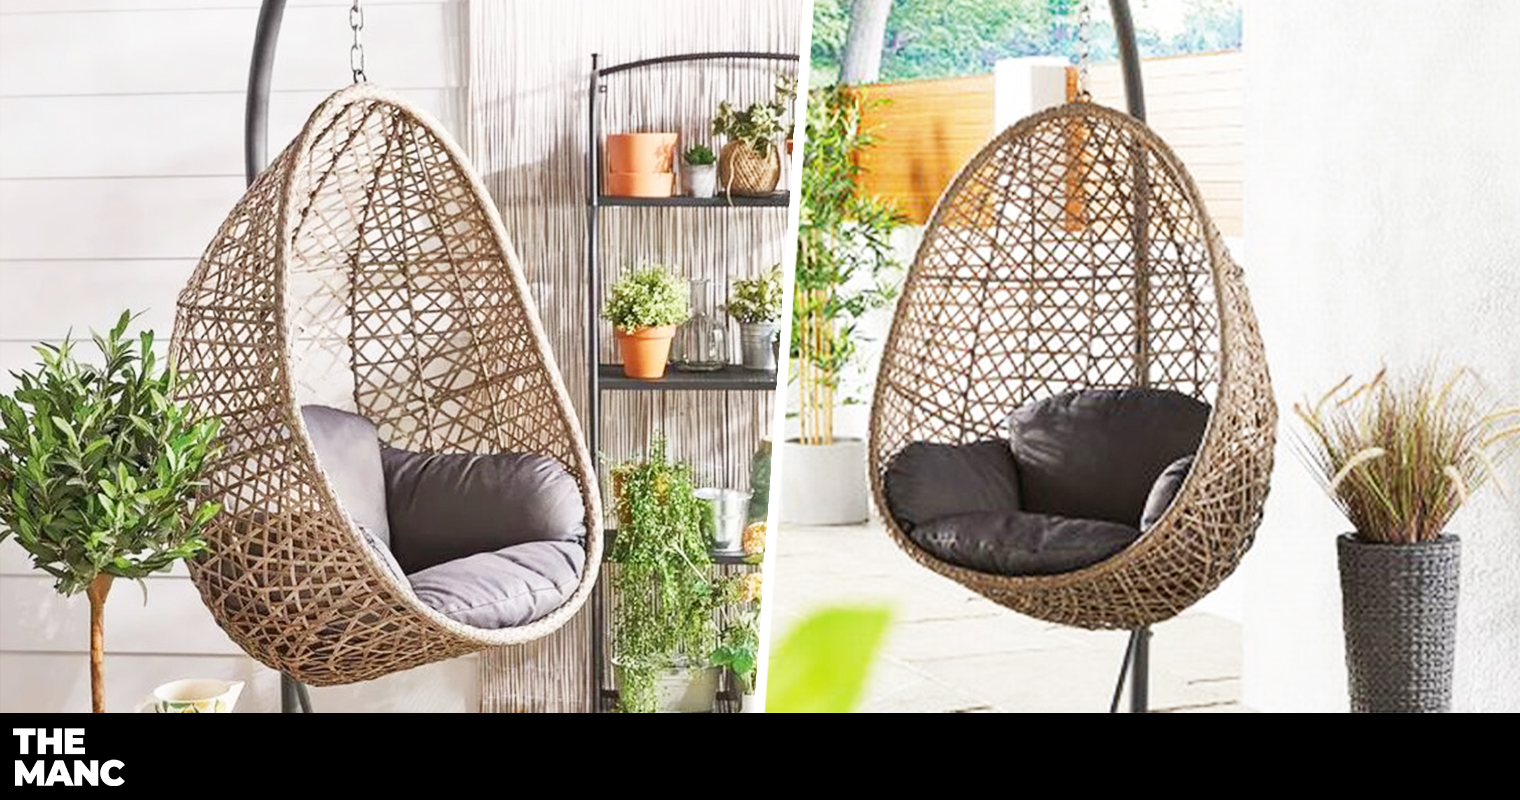 Aldi's best-selling 'Hanging Egg Chair' is back and you can buy it